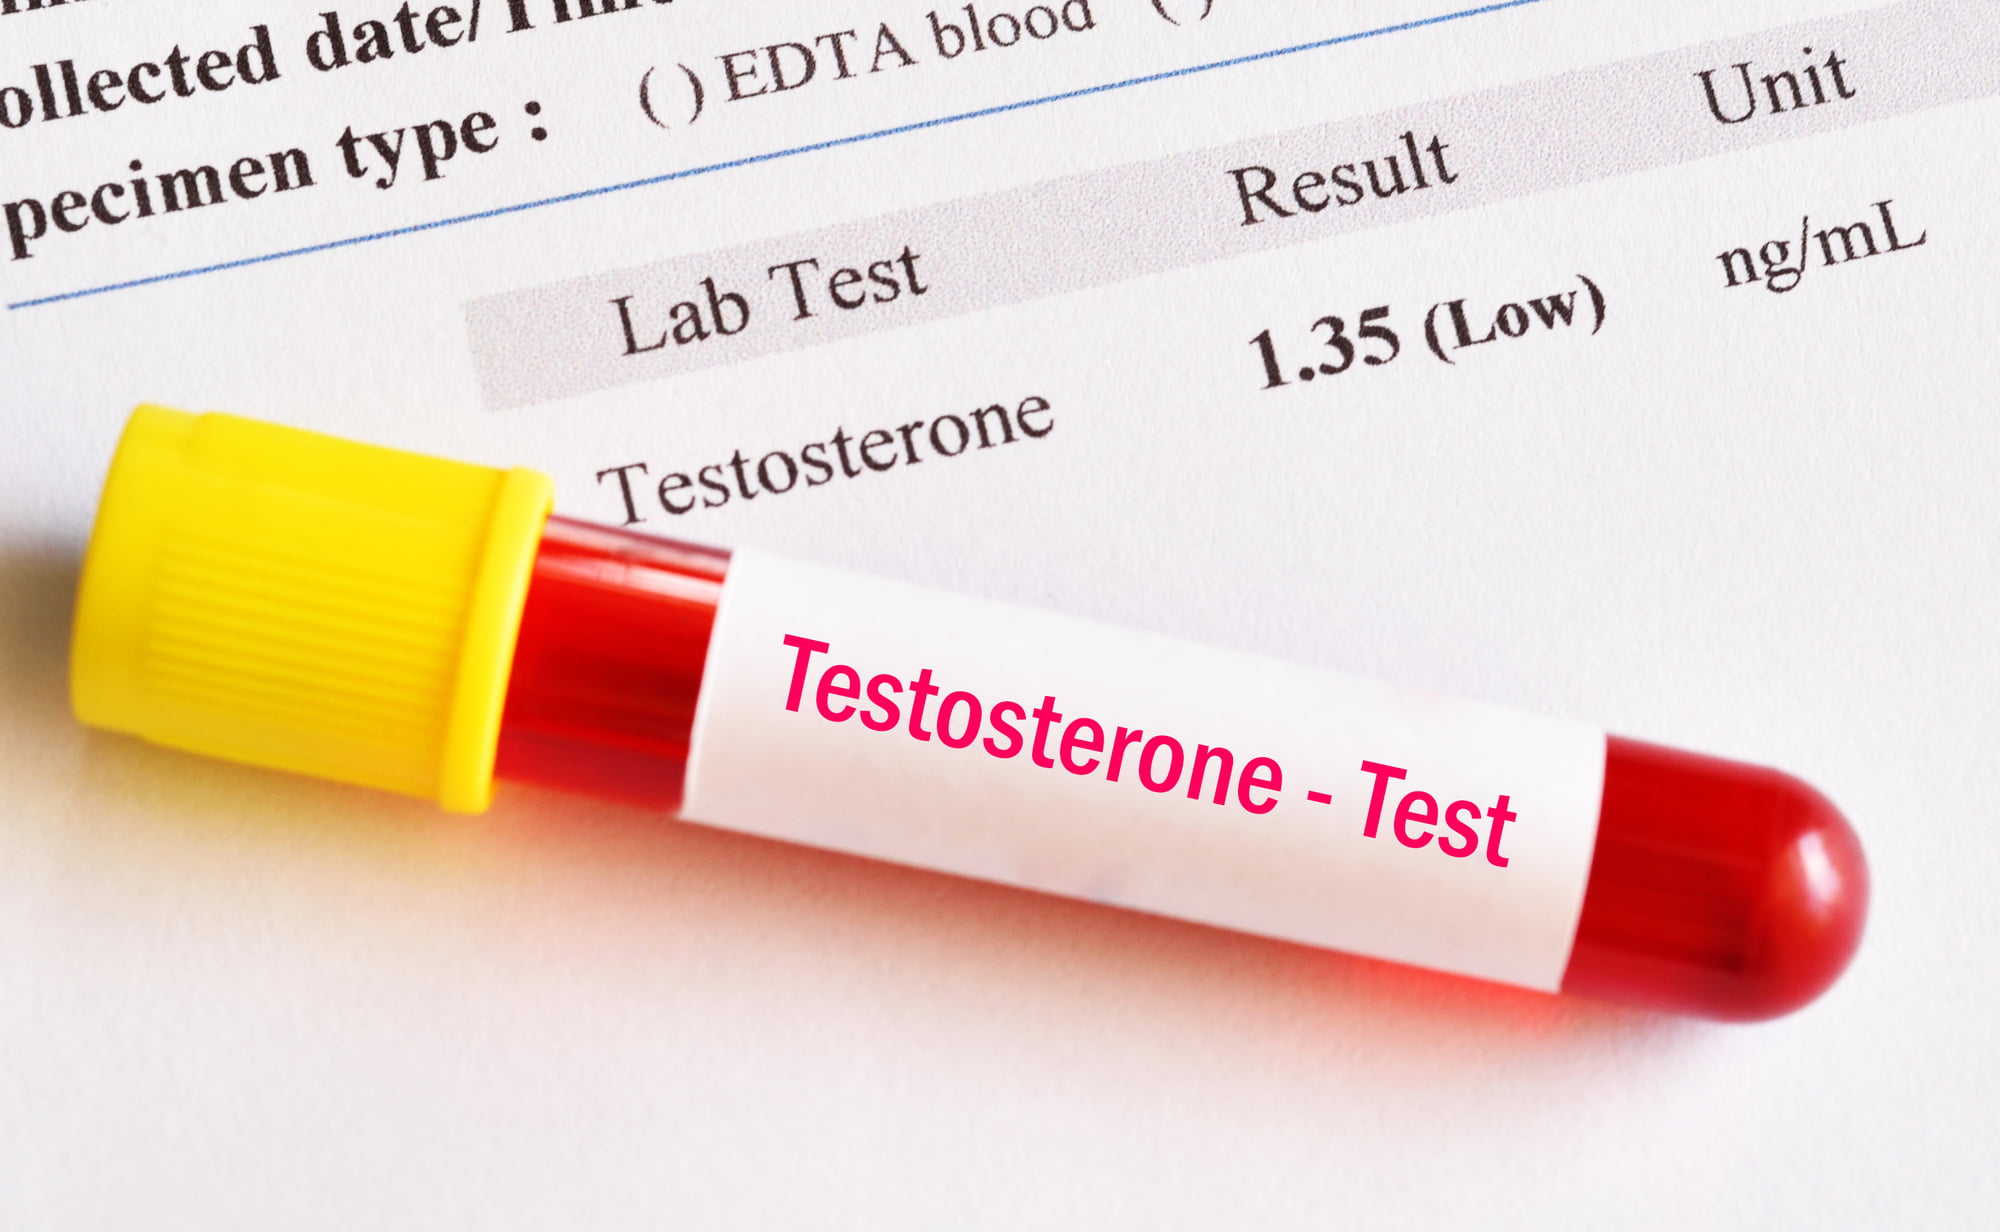 Are you looking for the right treatment to address your low testosterone? Is testosterone therapy safe? Find your answers here.